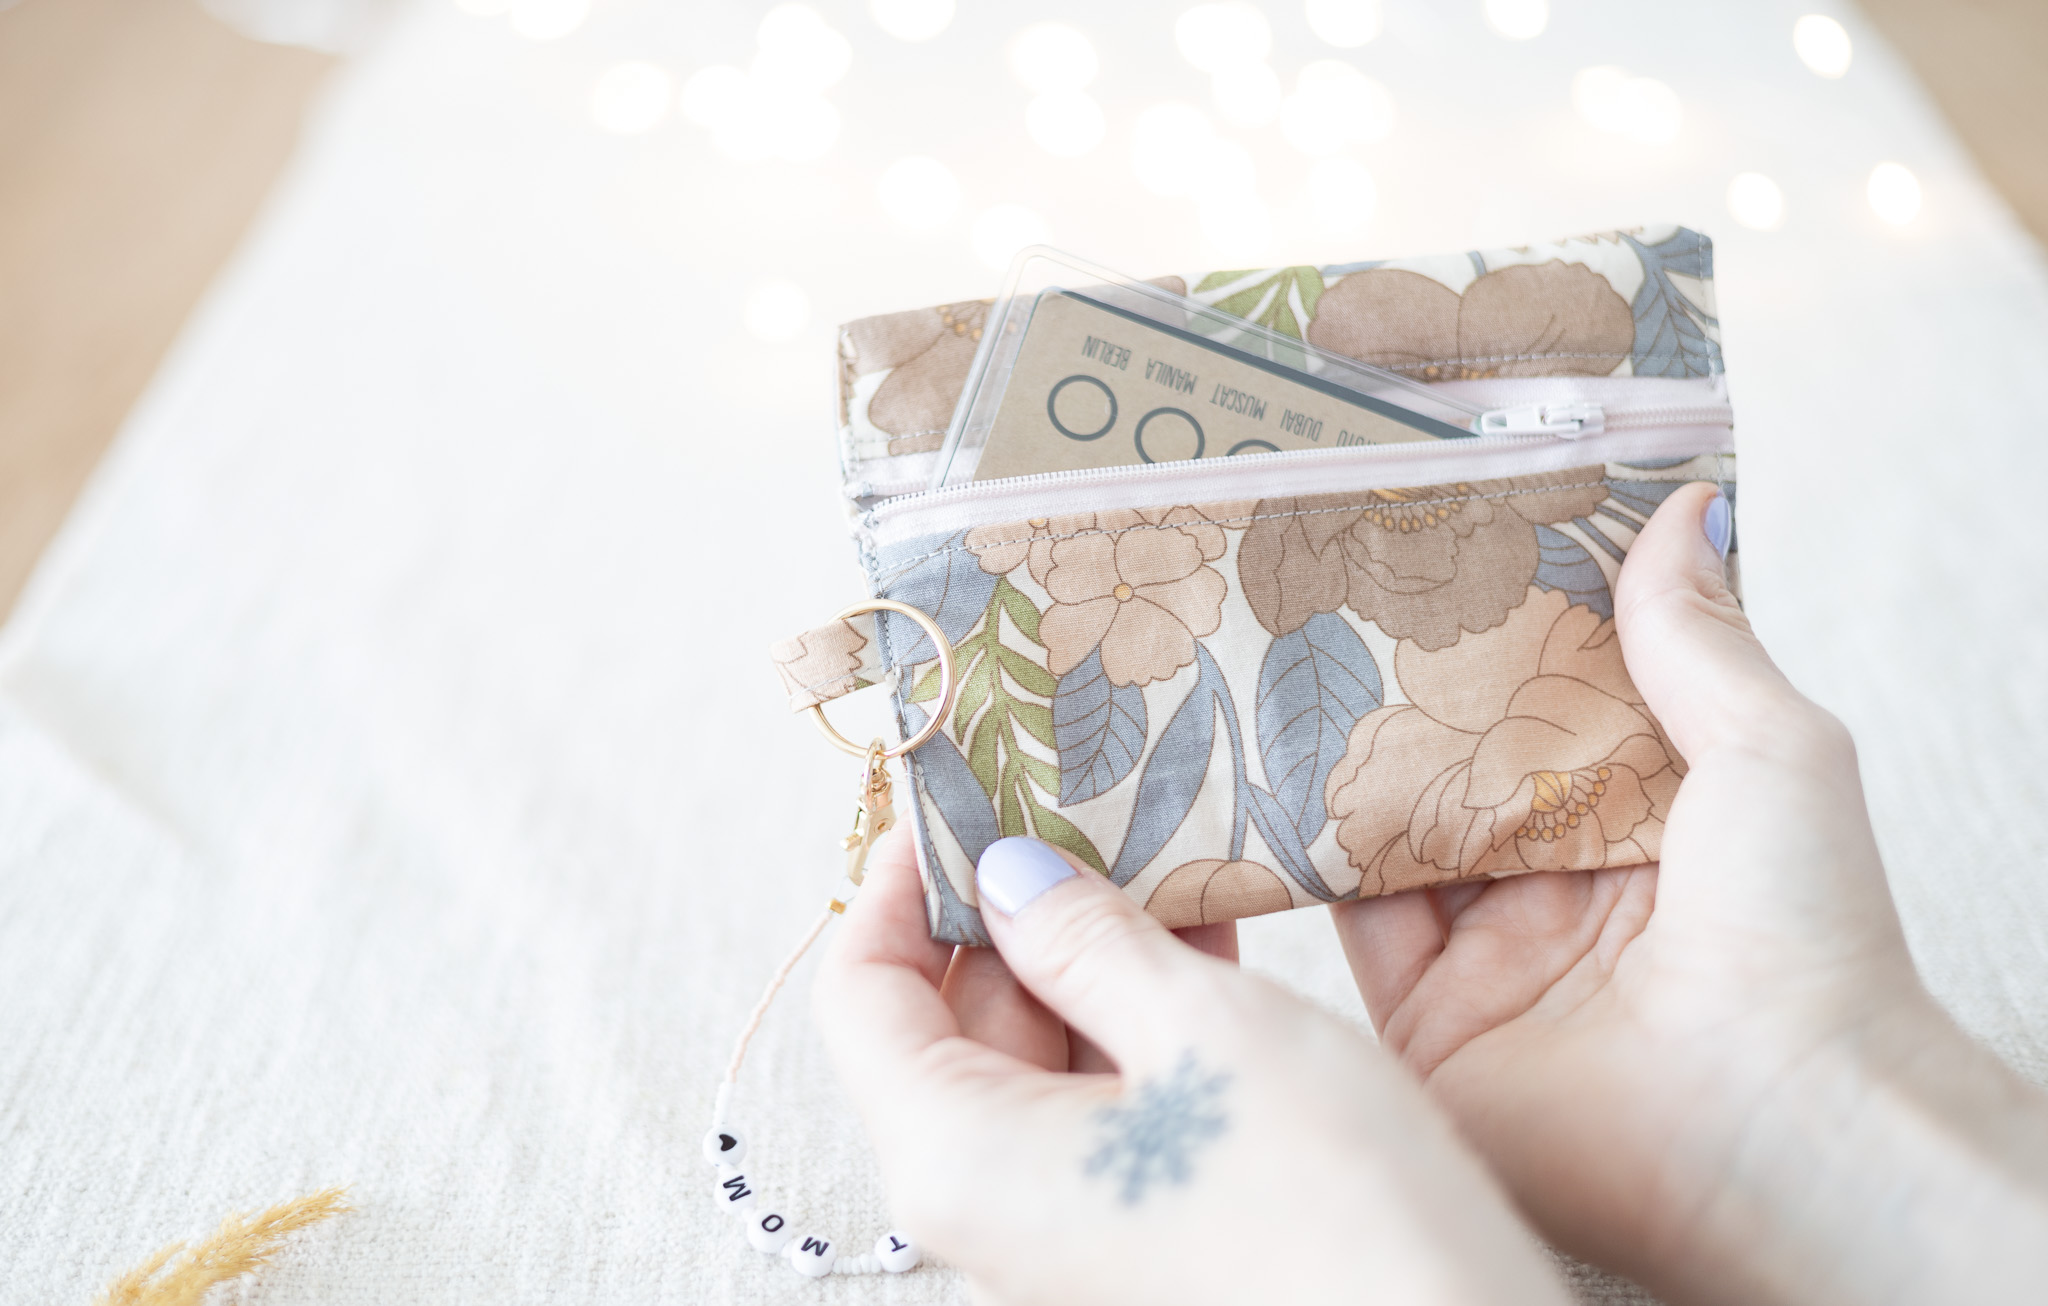 gift idea_small zipper pouch DIY with free sewing pattern